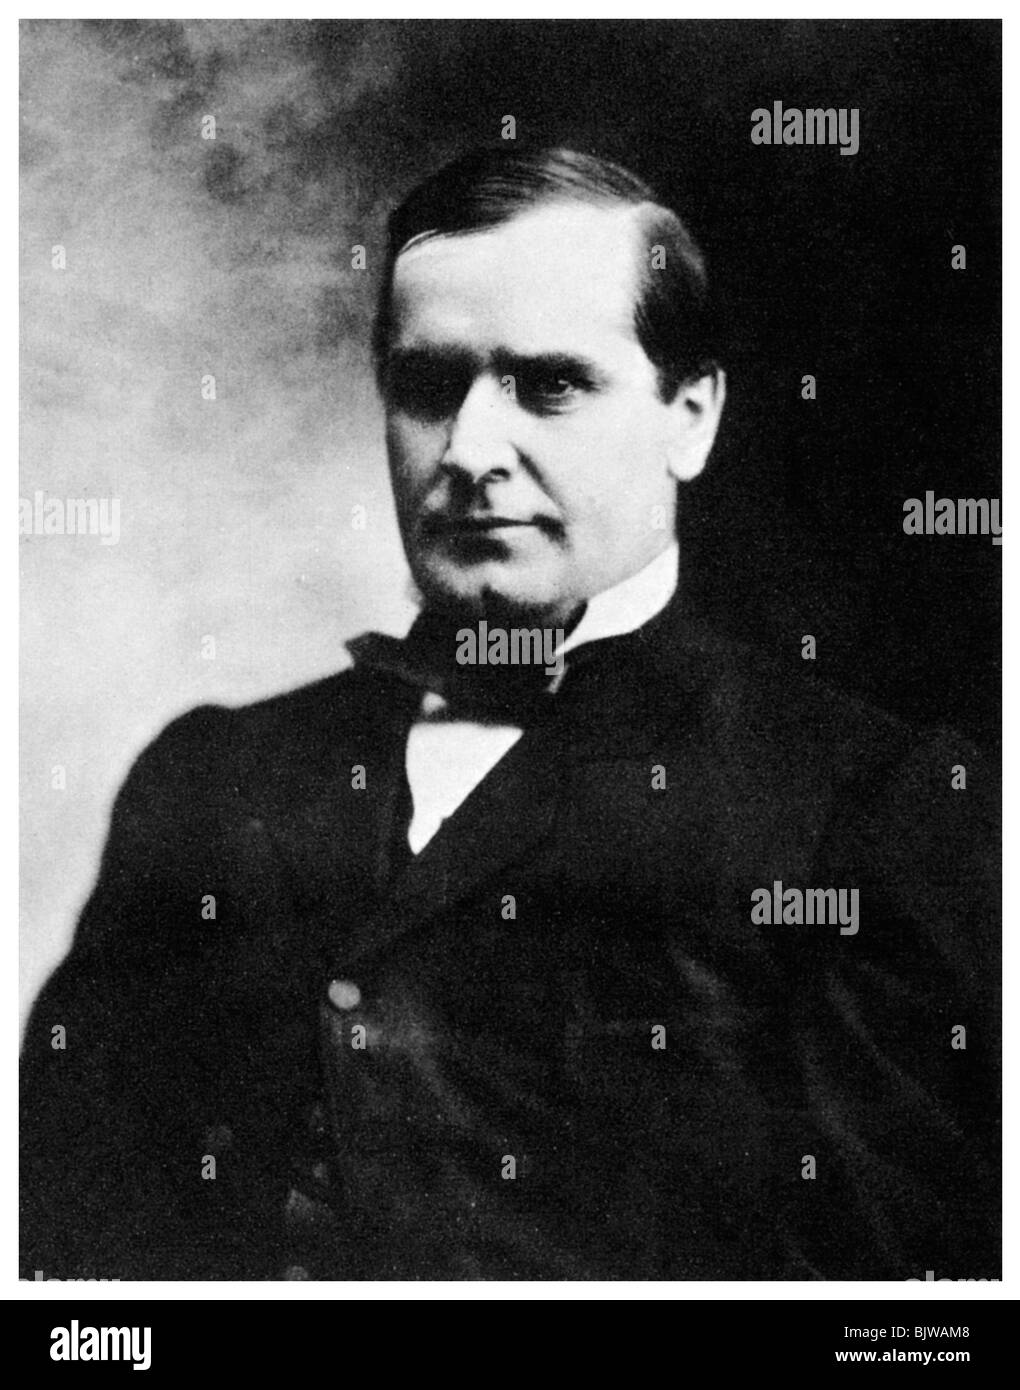 William McKinley, 25th President of the United States, 19th century (1955). Artist: Unknown Stock Photo